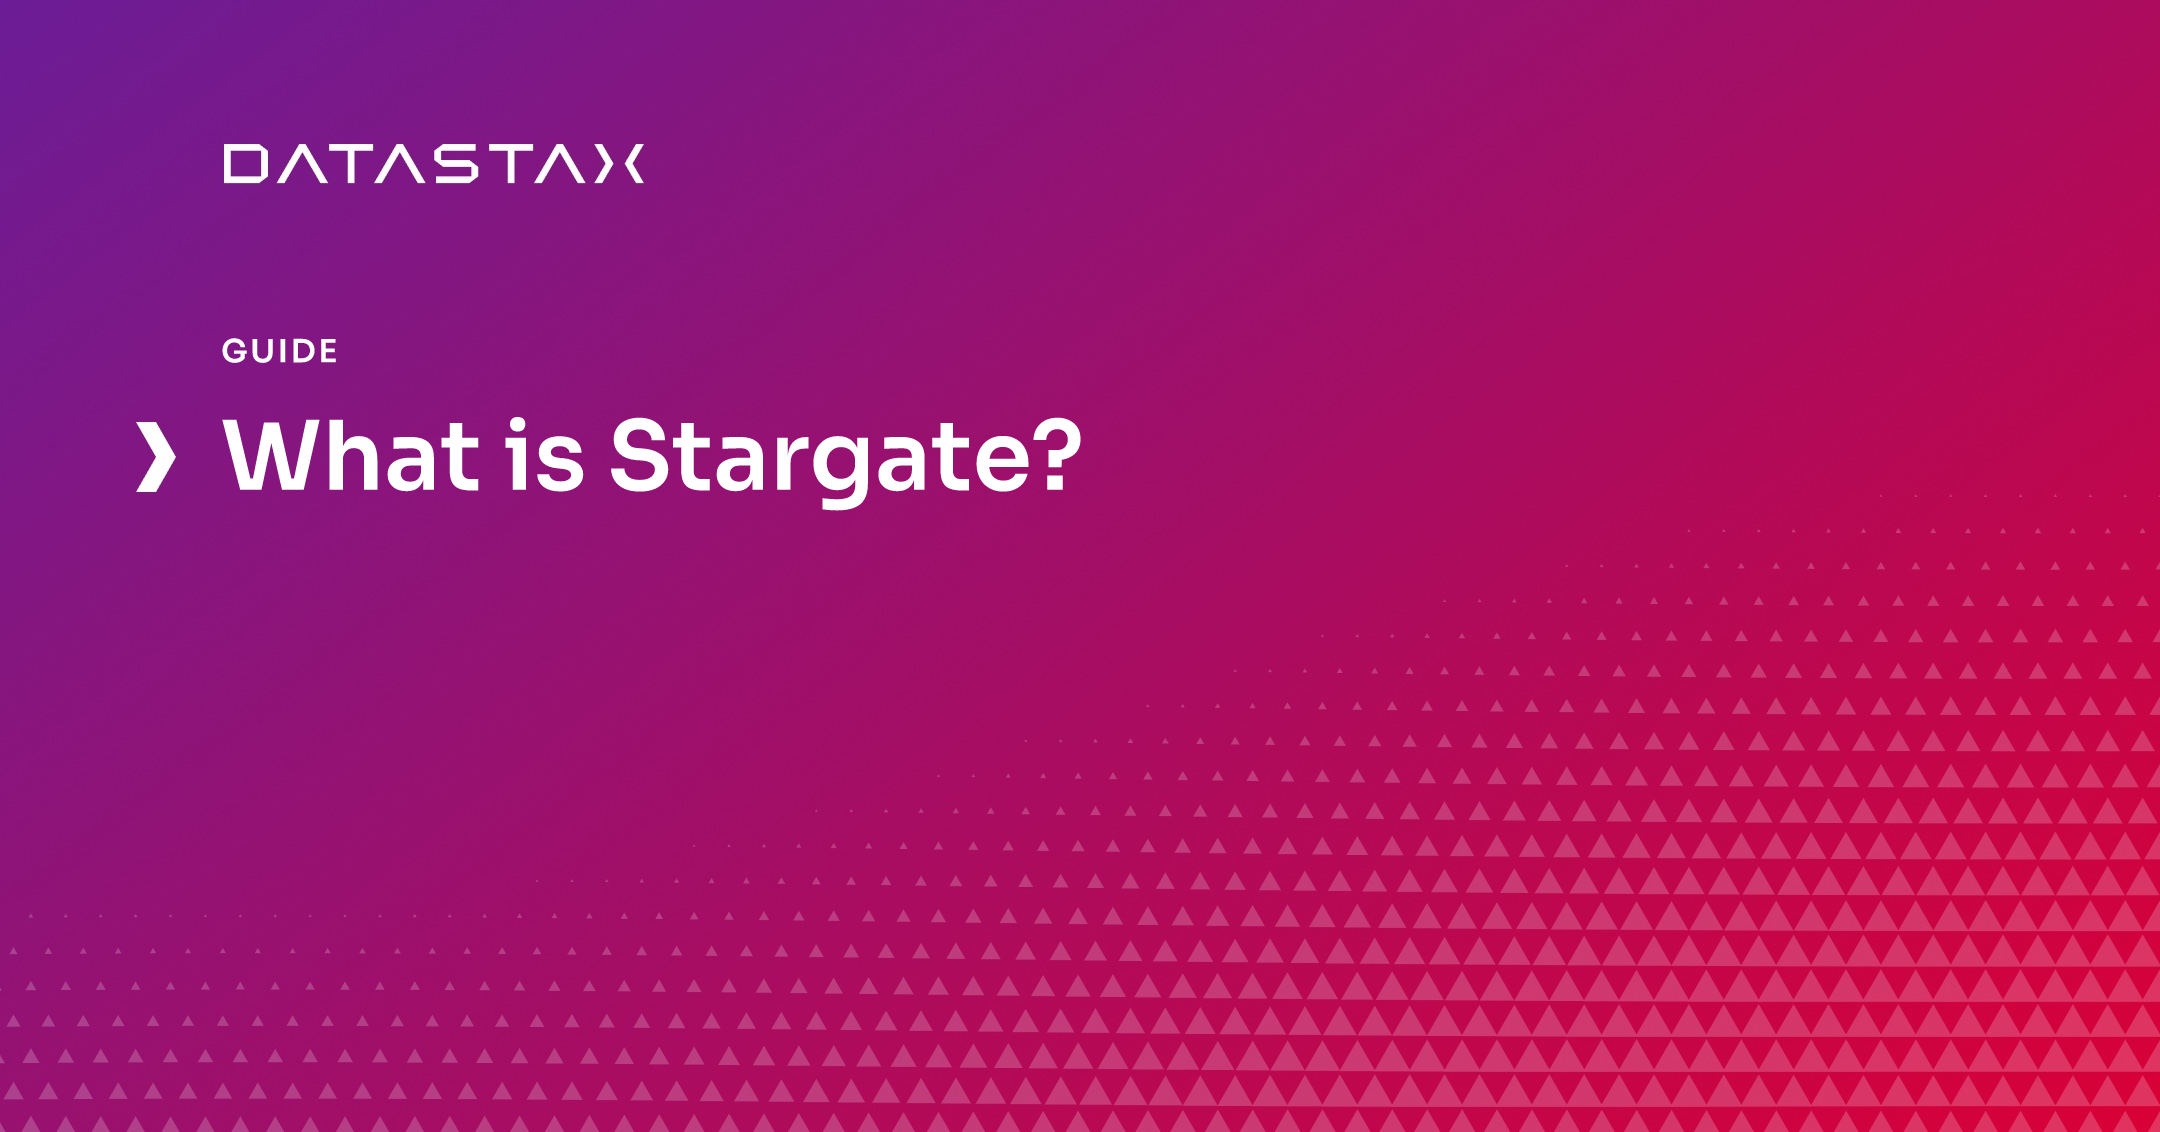 What is Stargate?